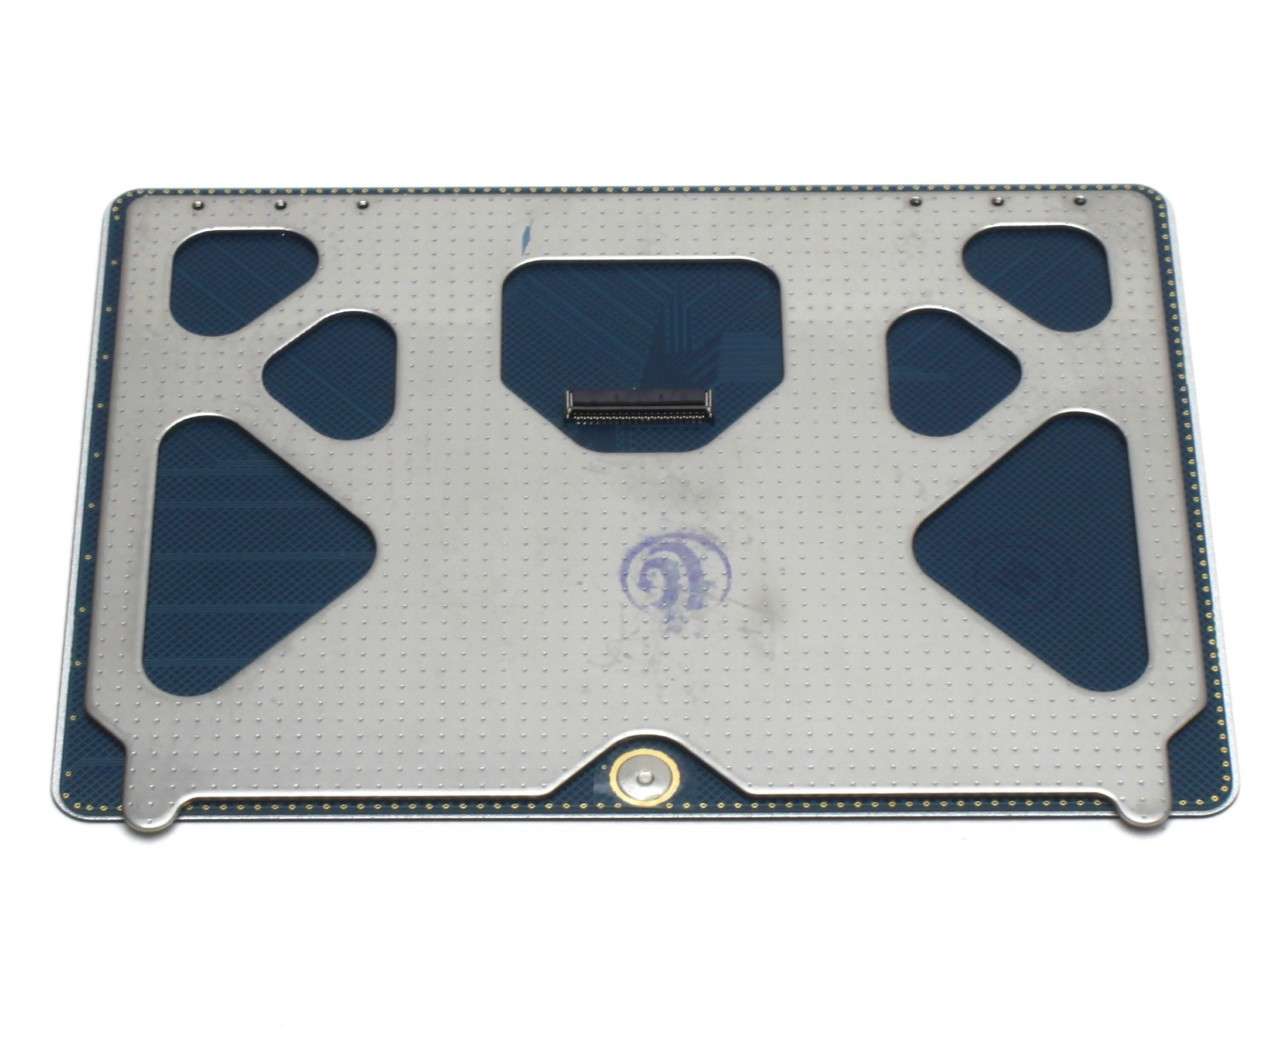 Touchpad Apple Macbook Pro 17 A1297 Late 2011 Trackpad image0